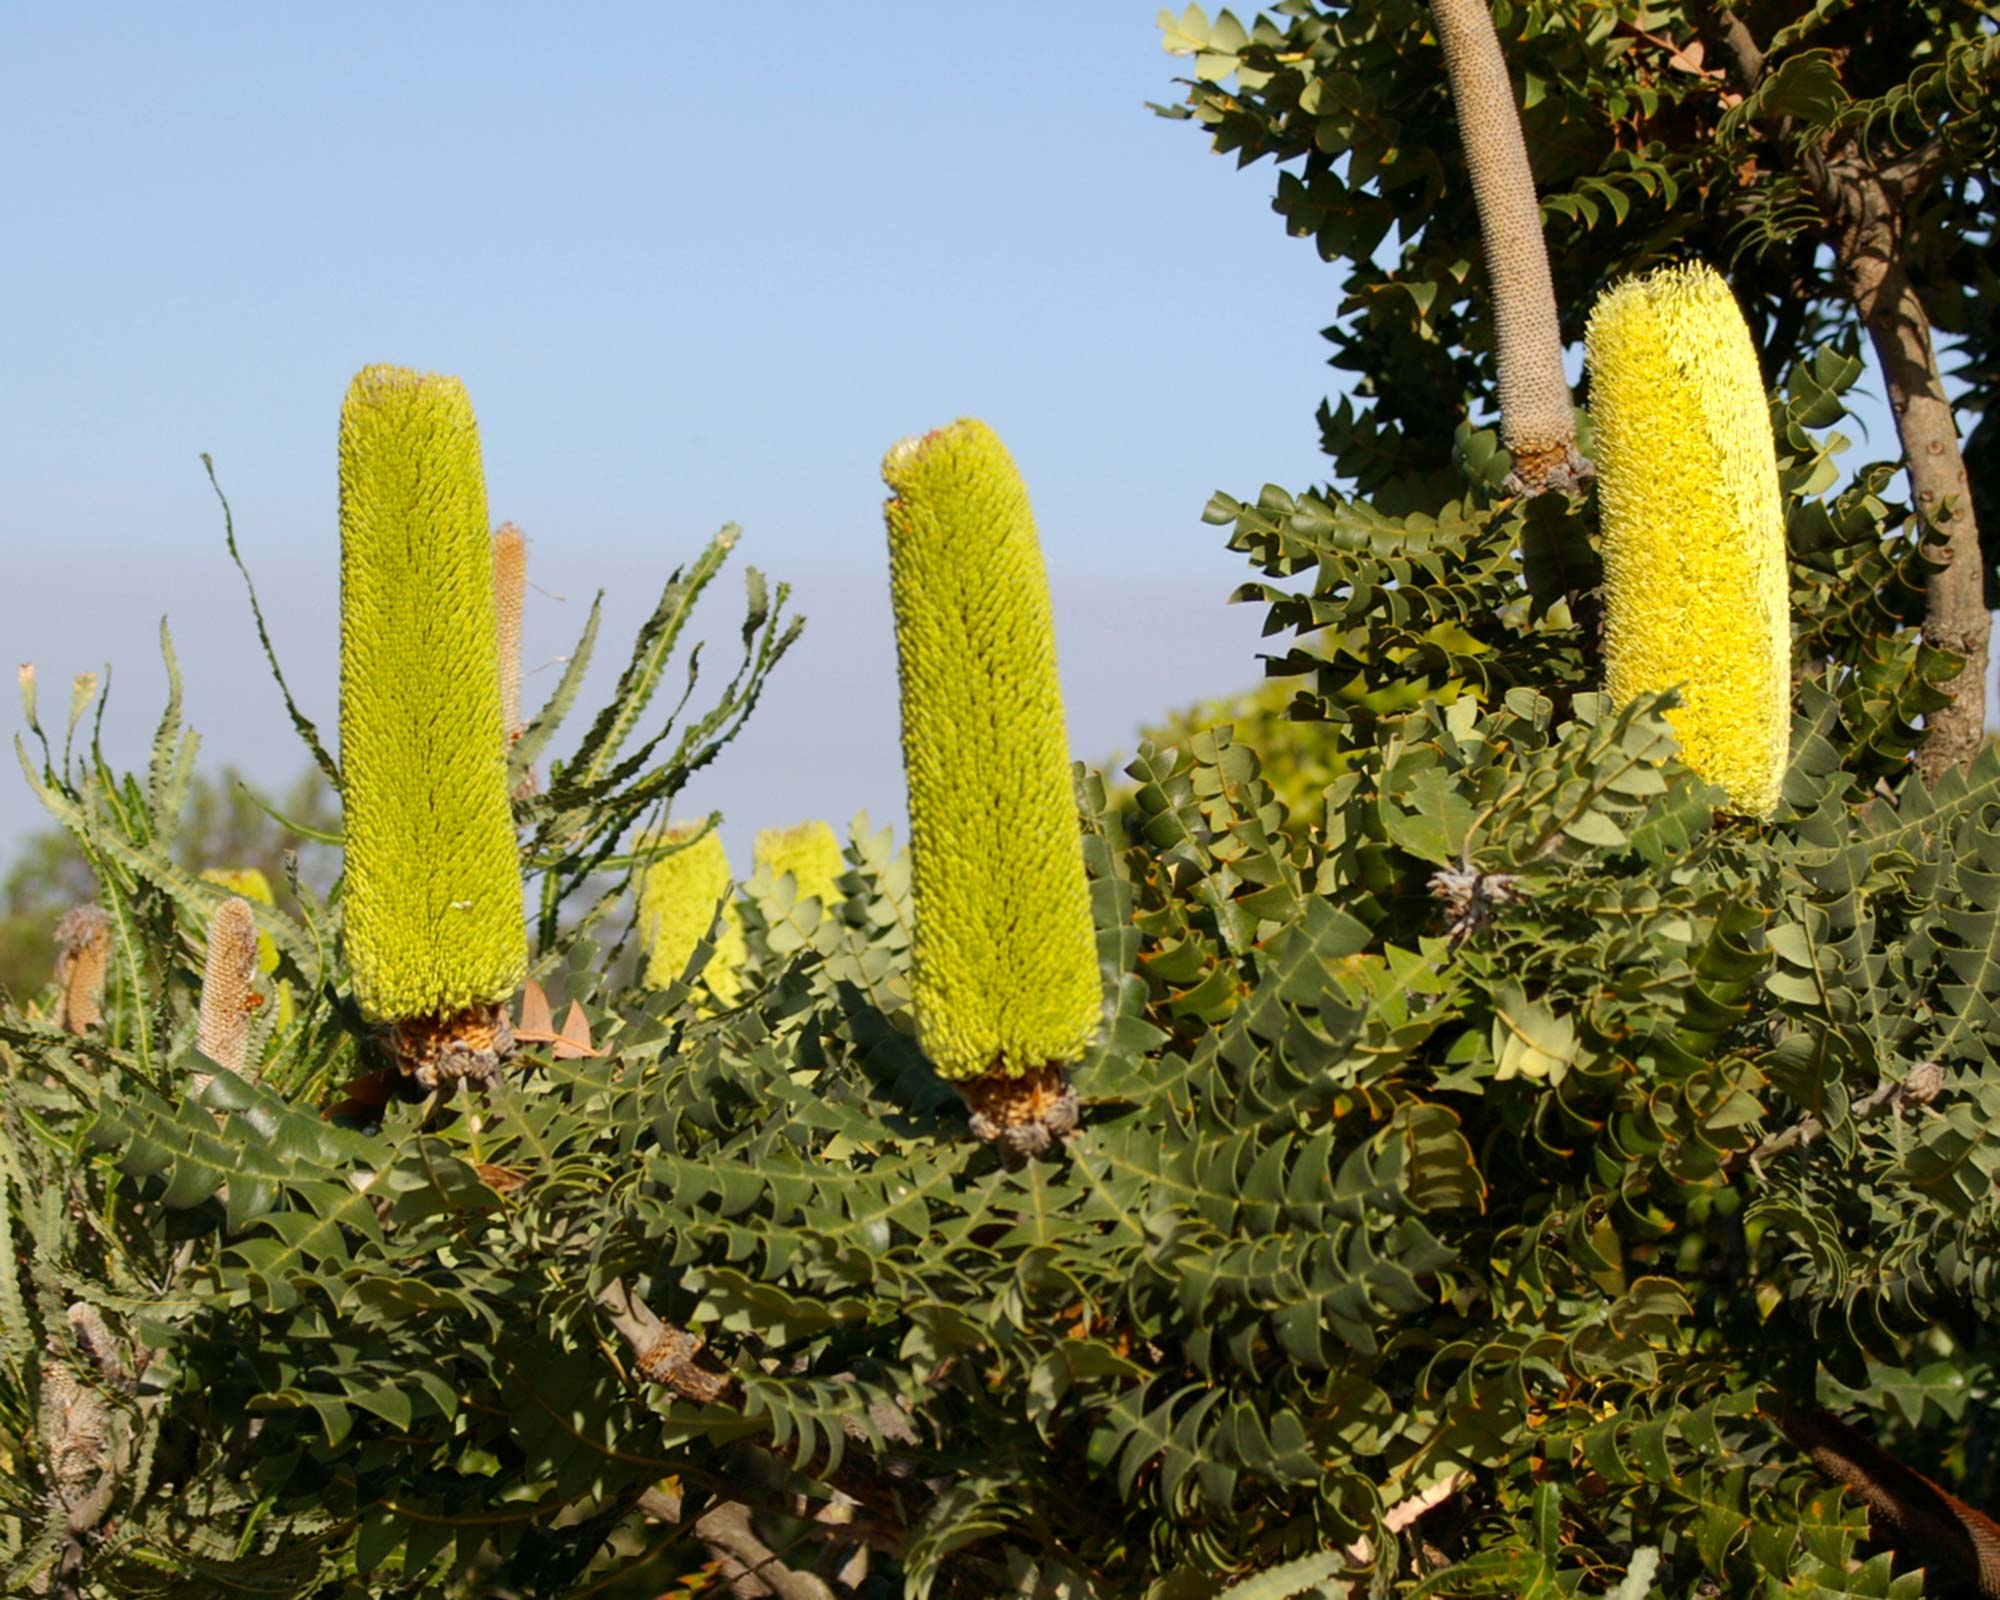 Banksia grandis - large cylindrical yellow flower spikes